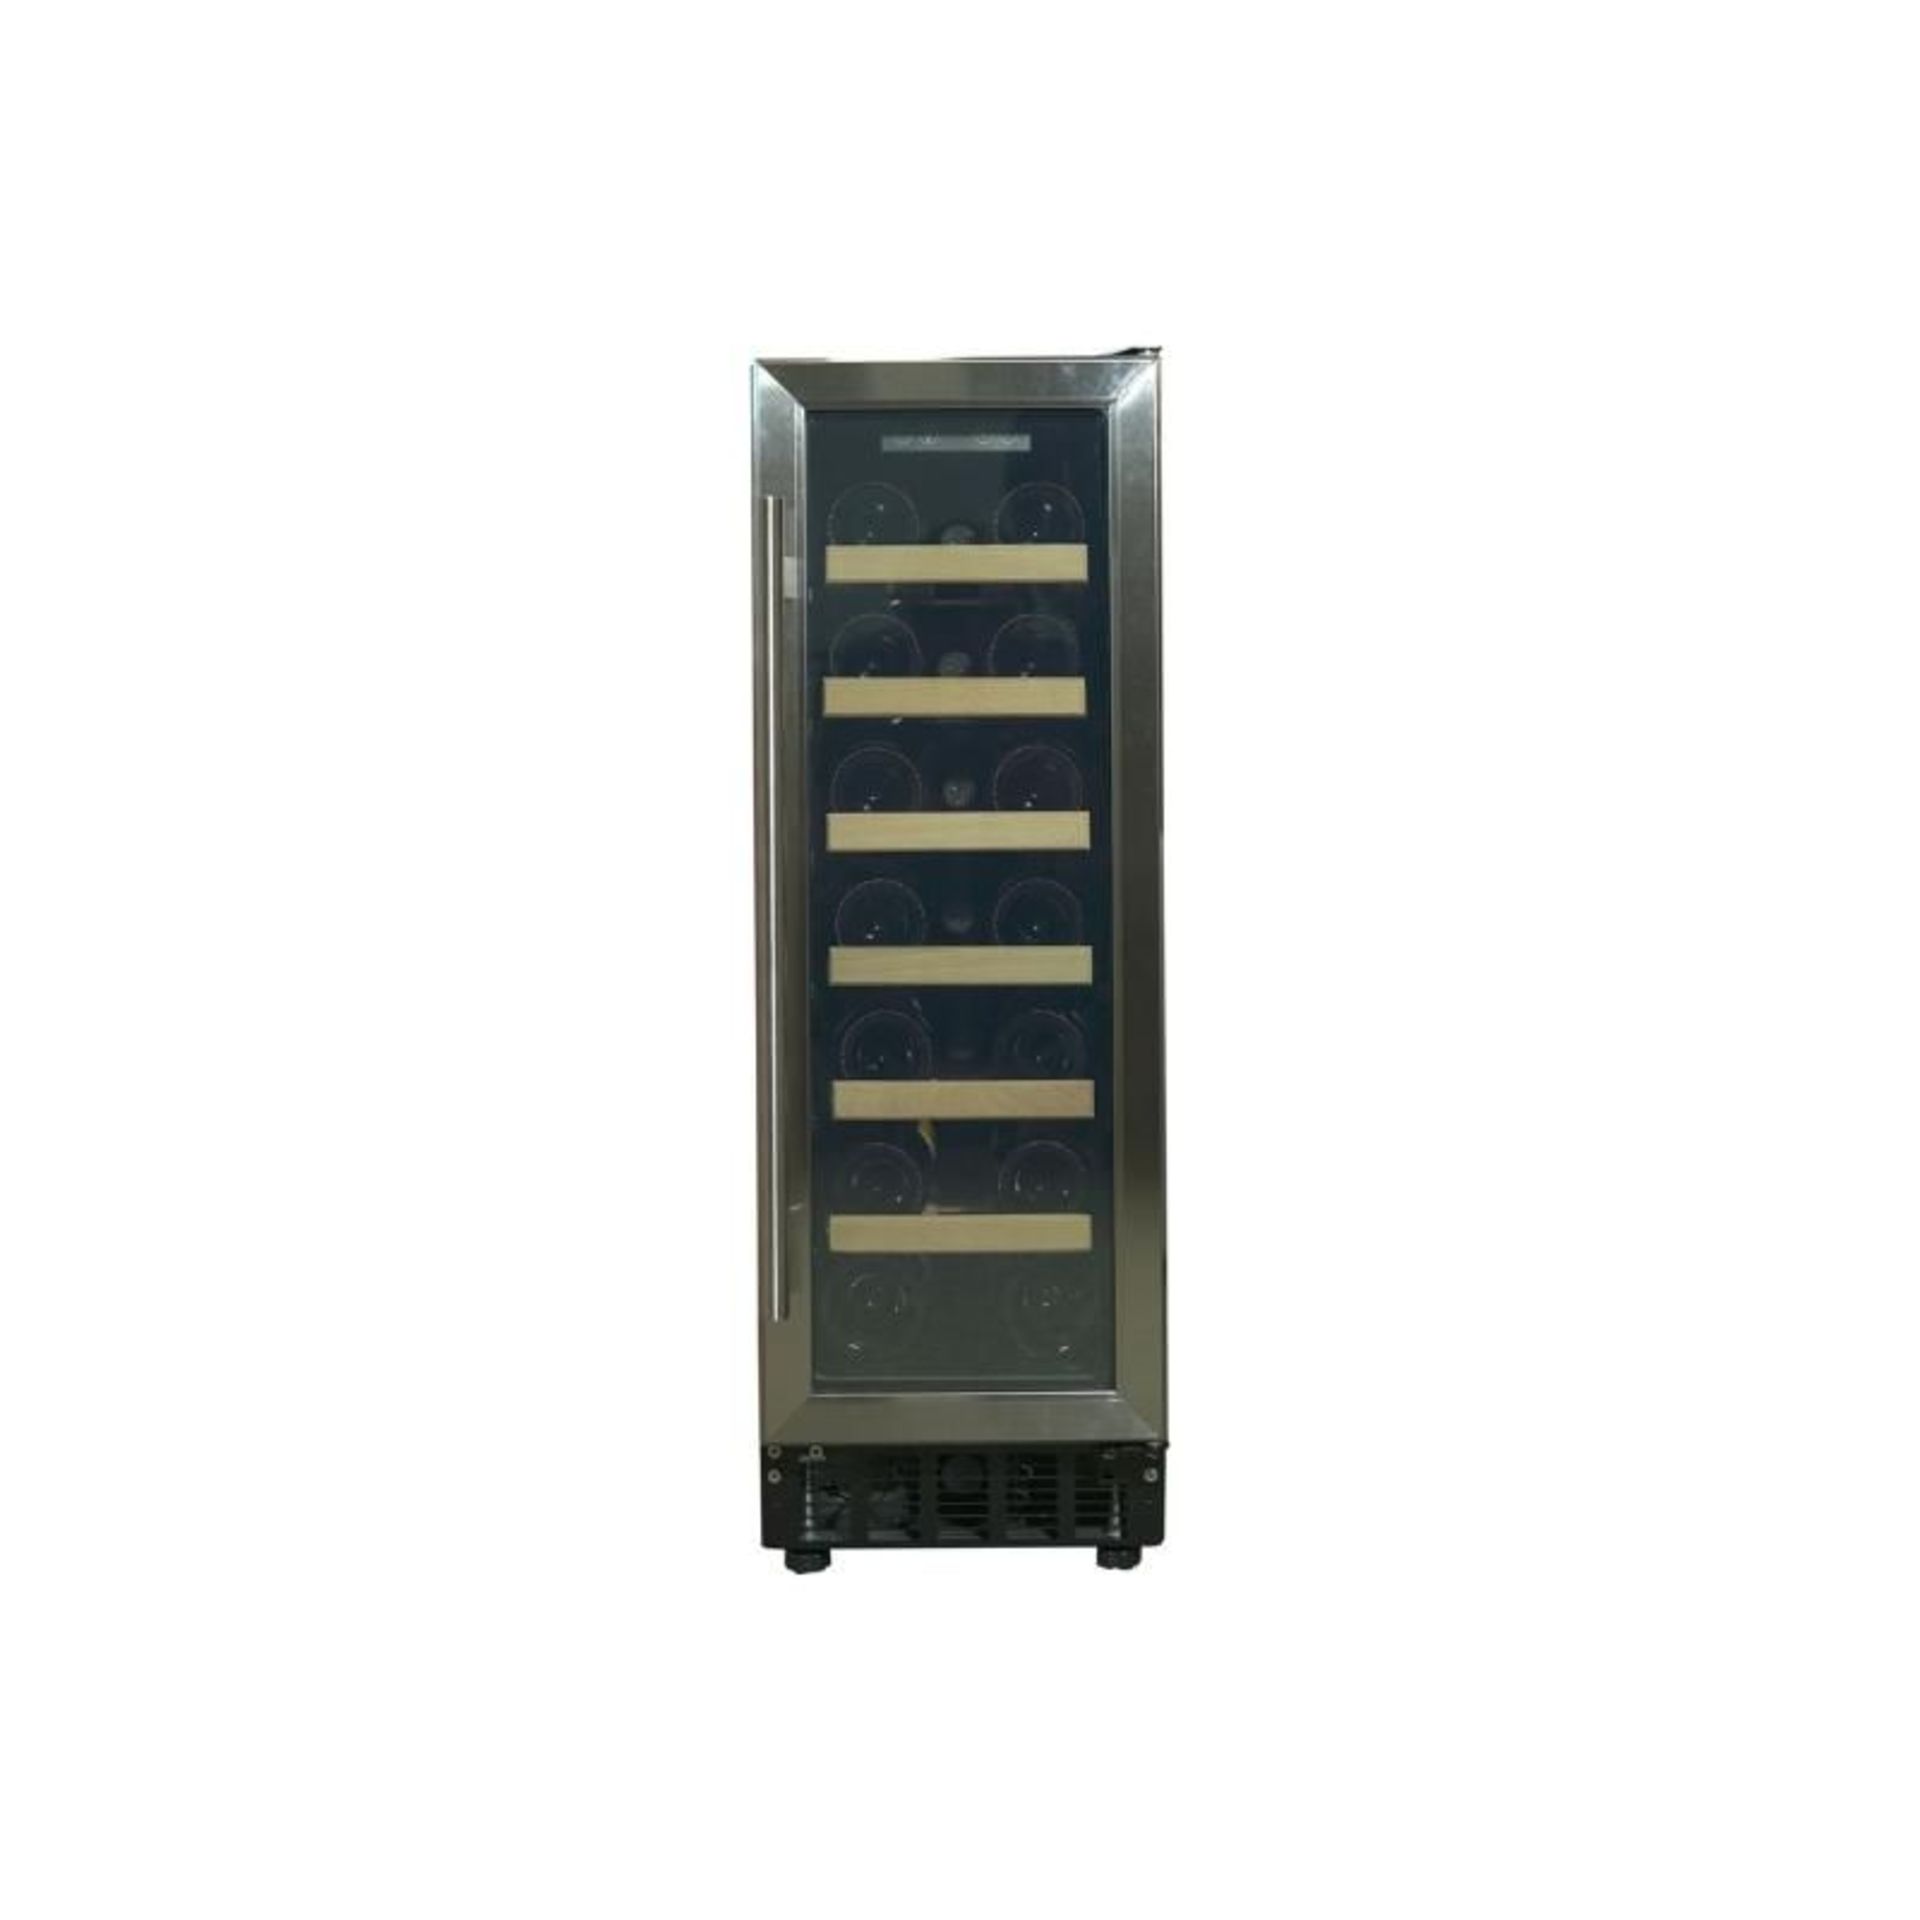 (F52) New Prima 300mm Stainless Steel Wine Cooler - PRWC403. RRP £398.21. 19 Bottle capacity. 6